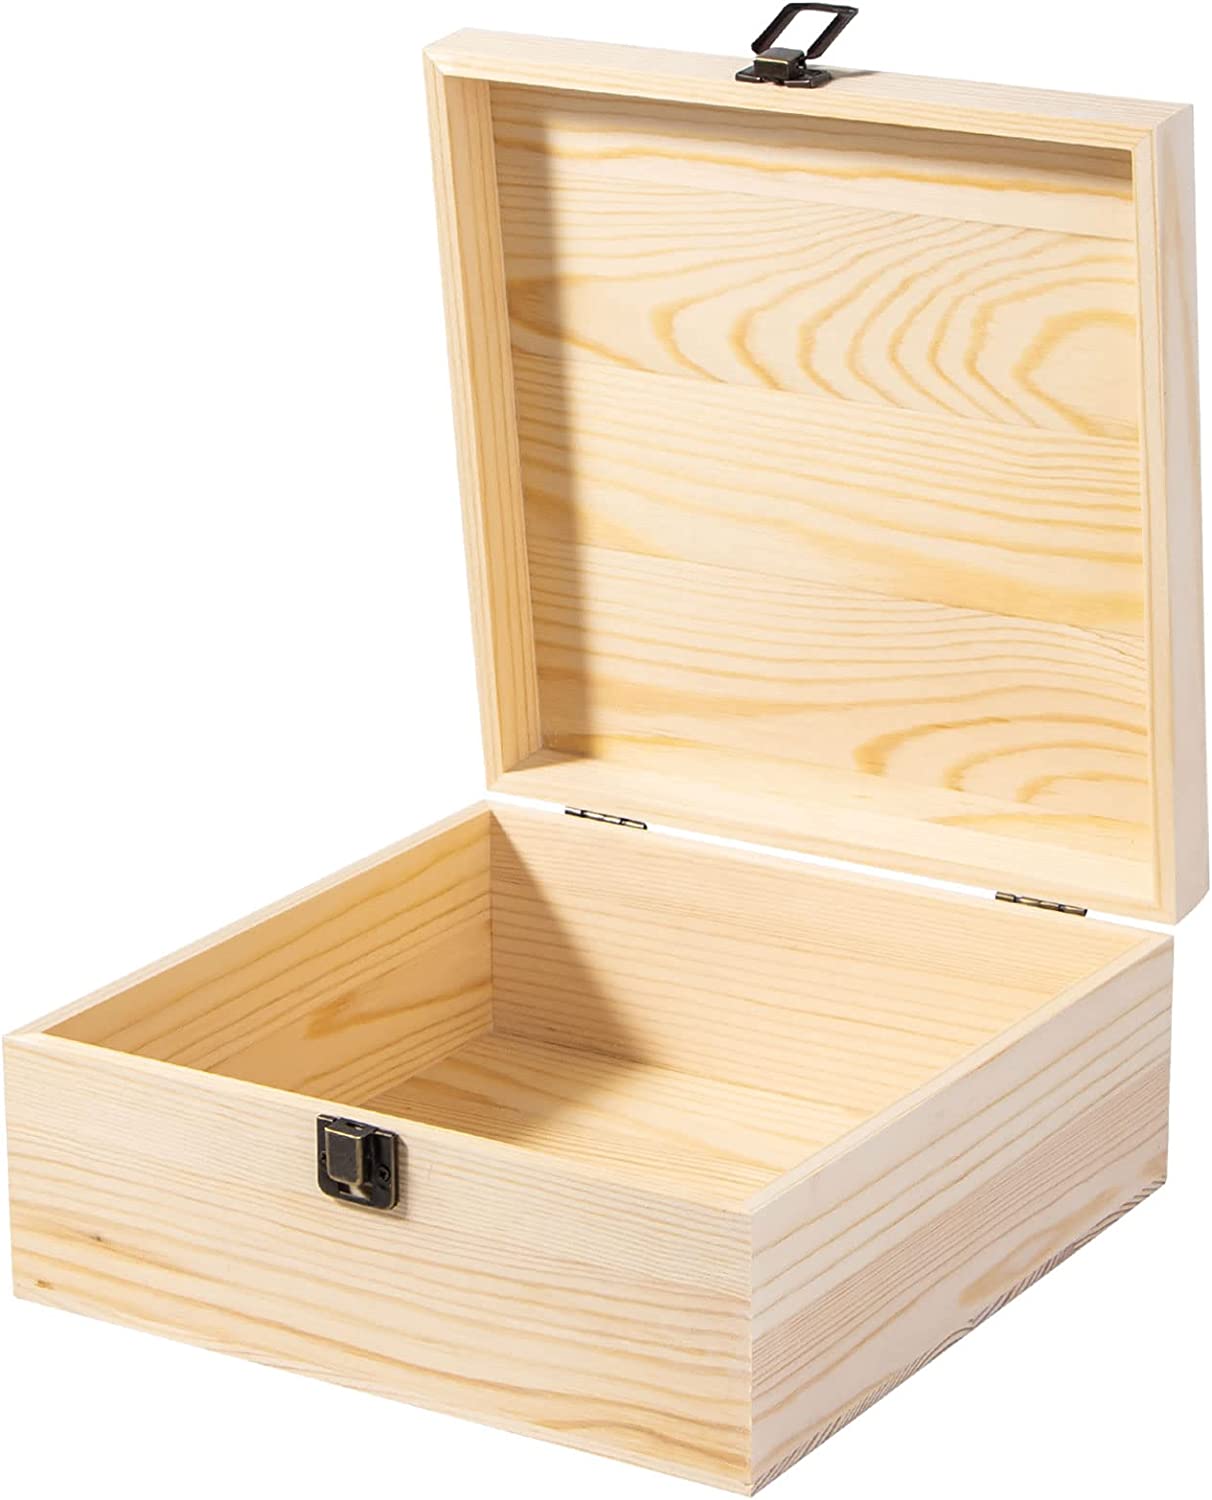 Wooden Chest Box-small Wooden Box, 6.7 X 5.1 X 3.1 Inch Natural Pine Wood  Box DIY Wood Box With Hinged Lids for Art, Hobbies, Jewelry Box 